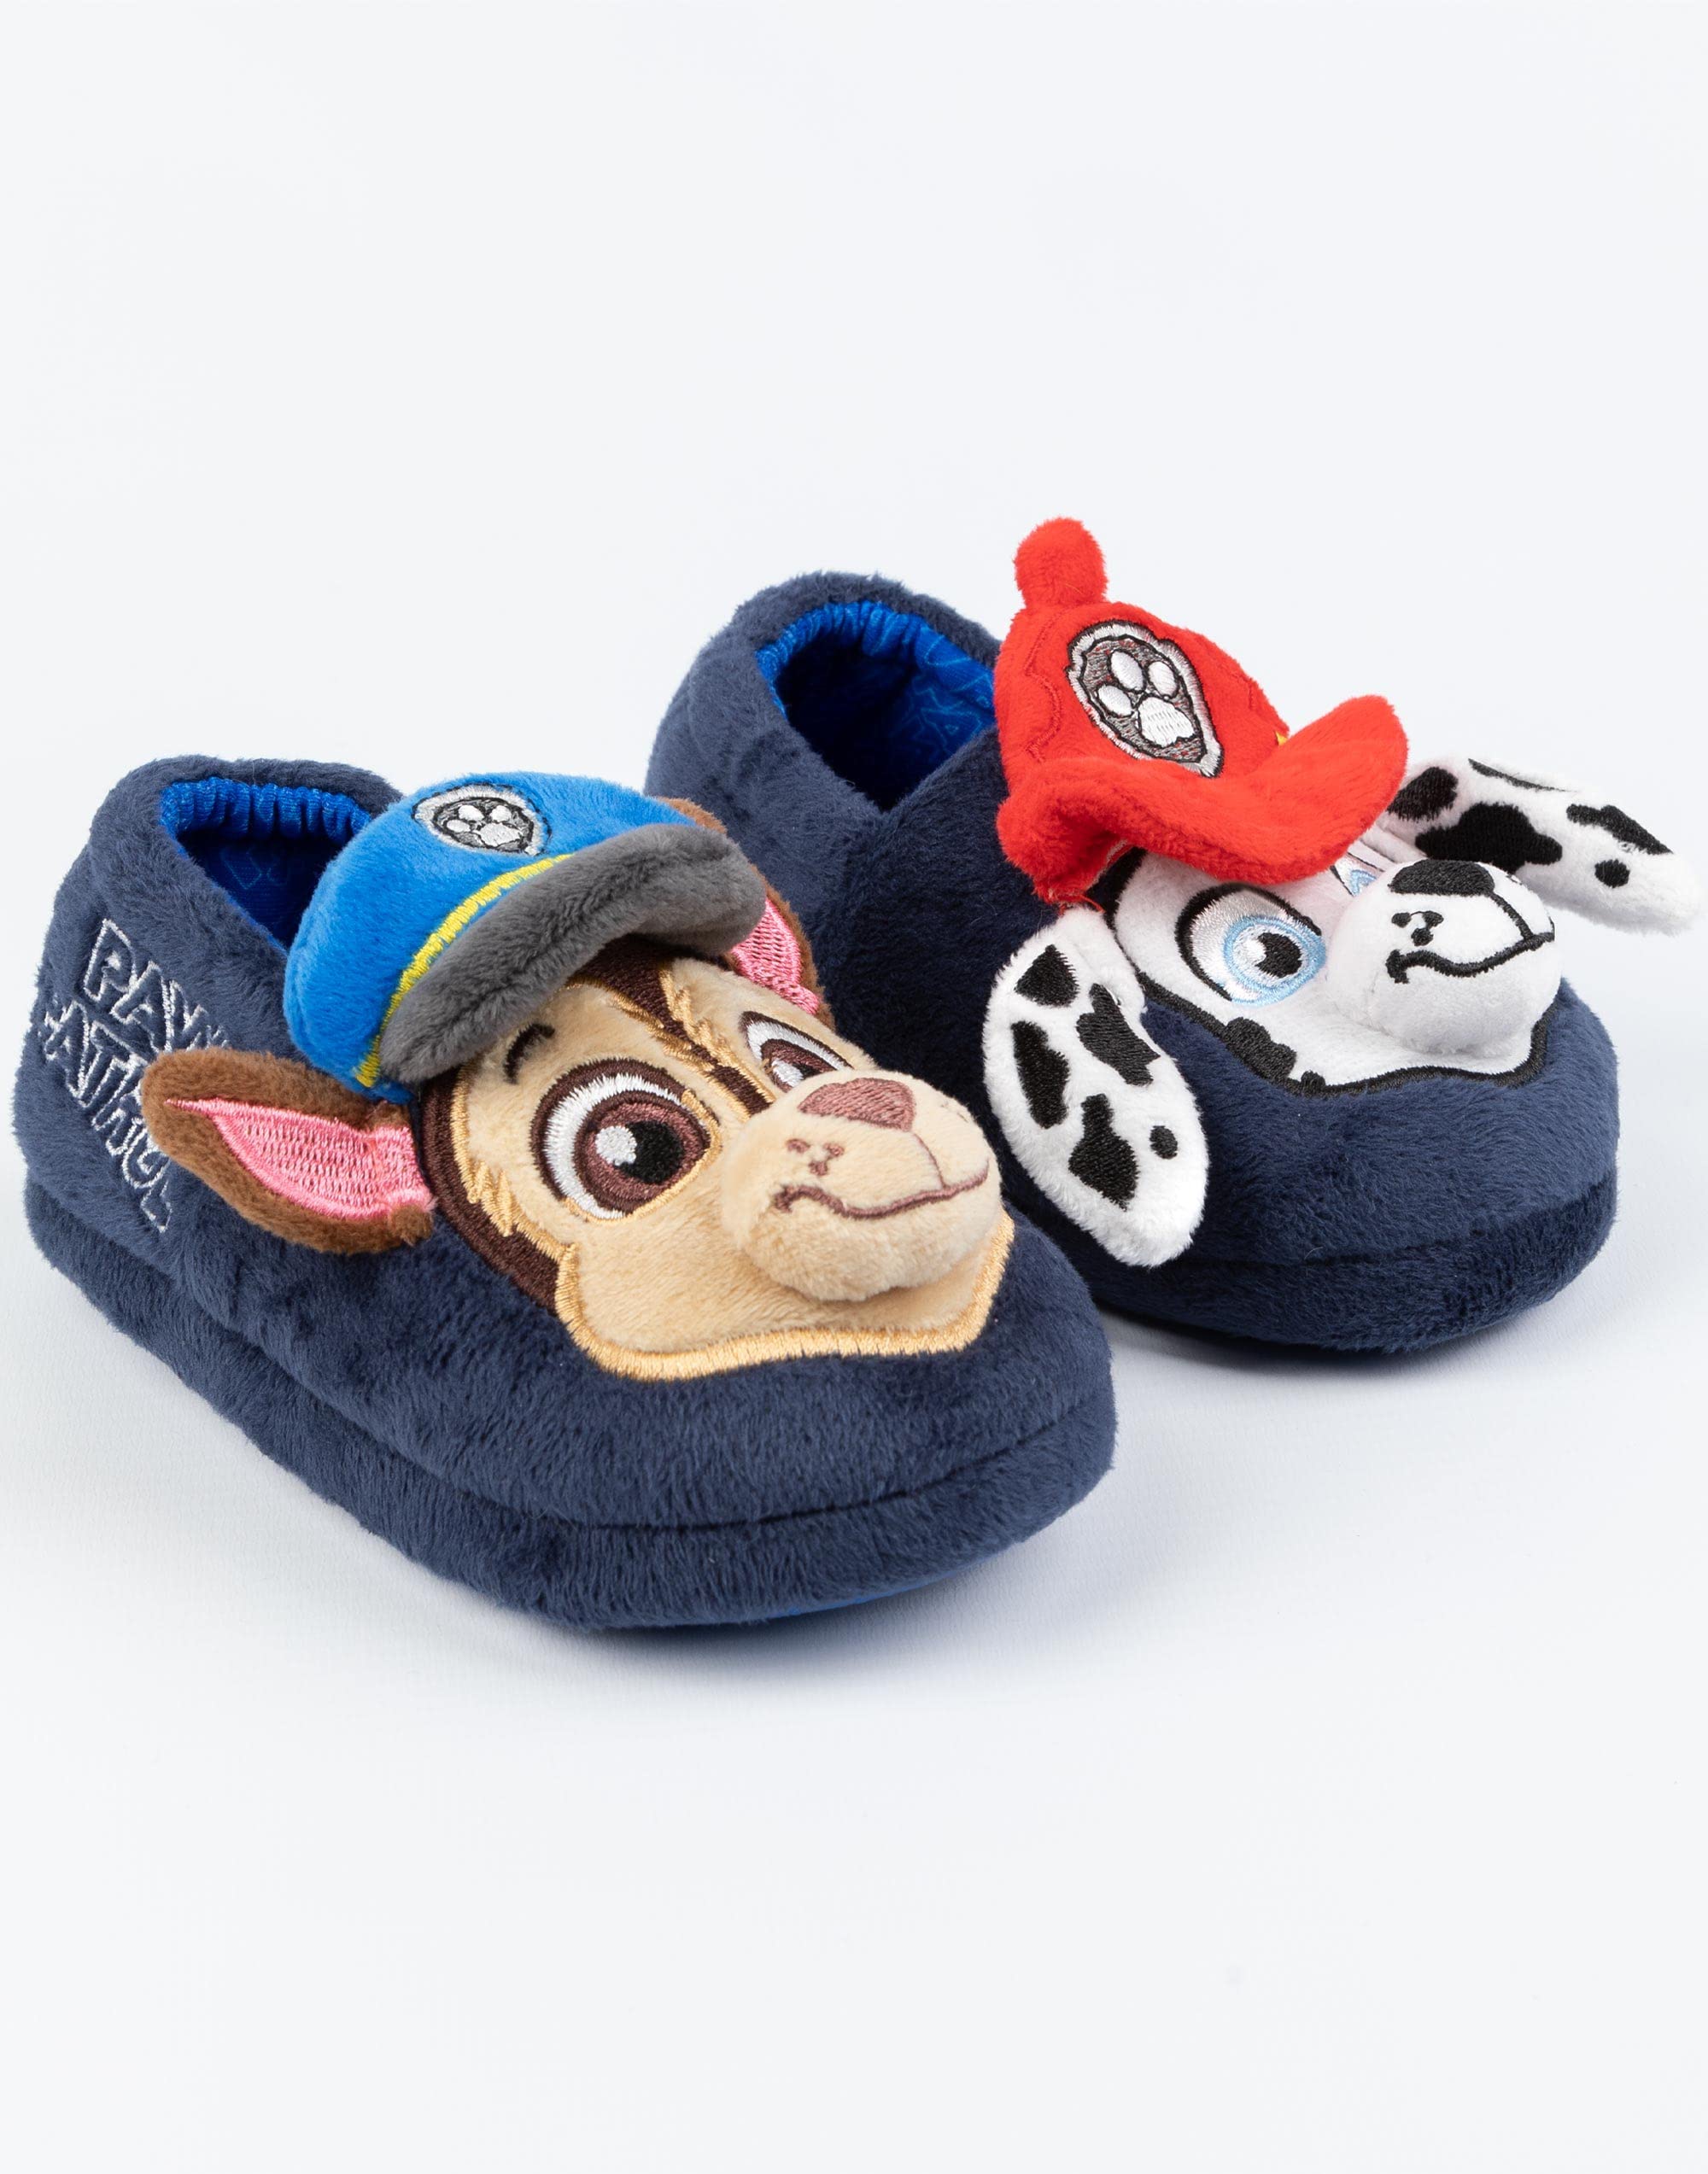 Paw Patrol Slippers Kids Toddlers | Girls Boys Animated Rescue Pups 3D Ears Chase Marshall Slip On House Shoes